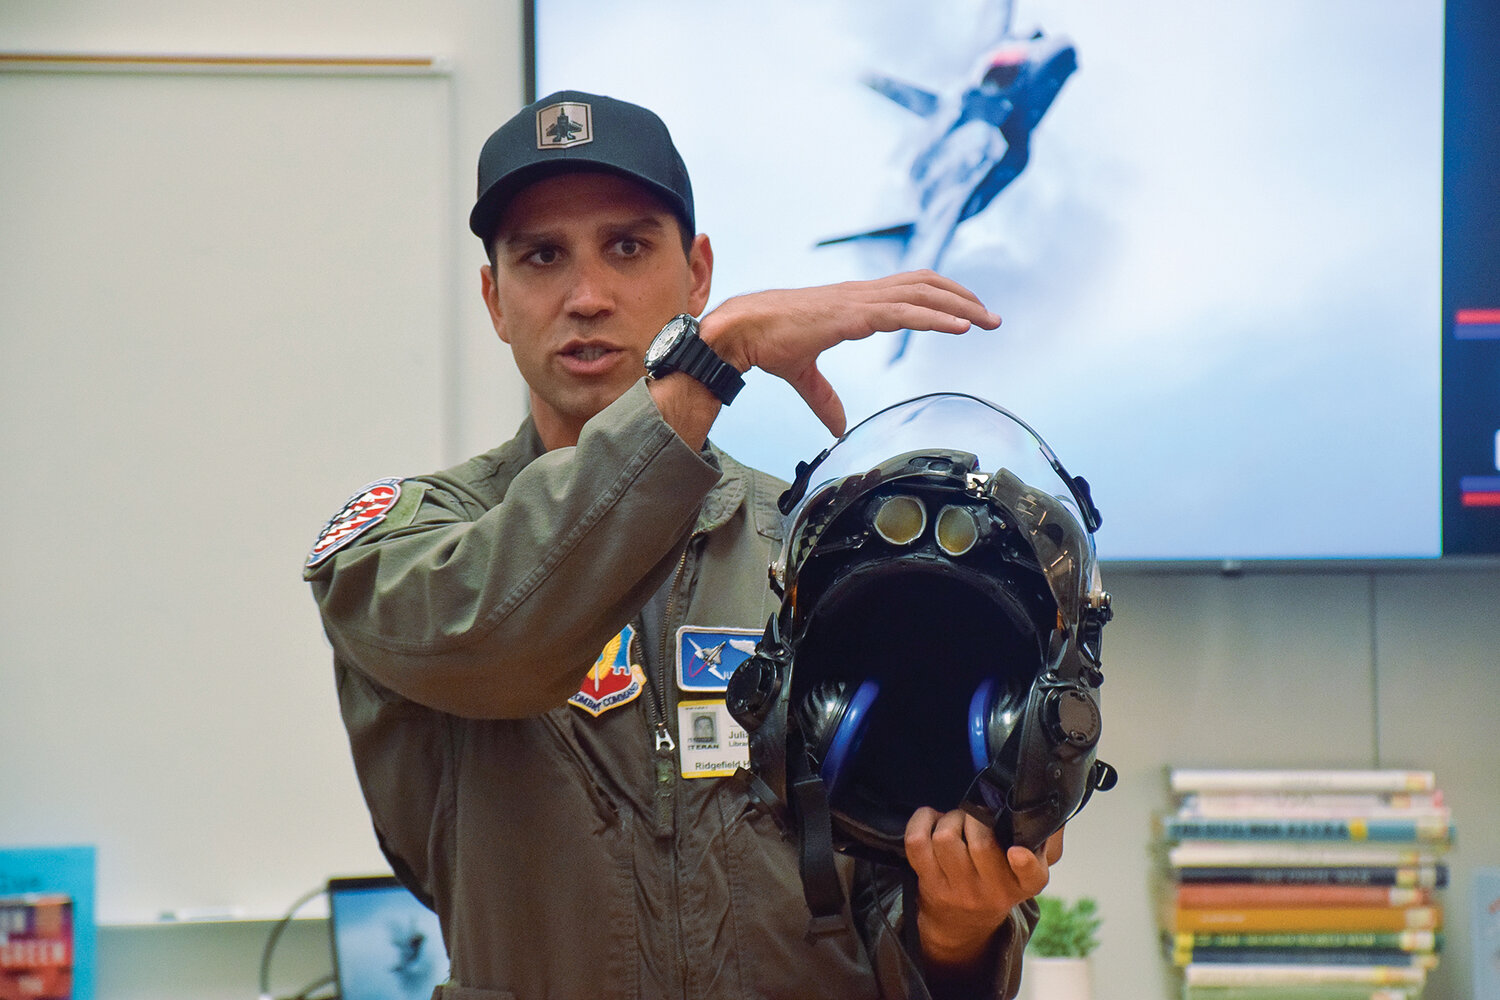 U.S. Air Force Capt. Julian Kinonen shows off the helmet for the F-35A Lightning II fighter jet to students at Ridgefield High School on May 18.